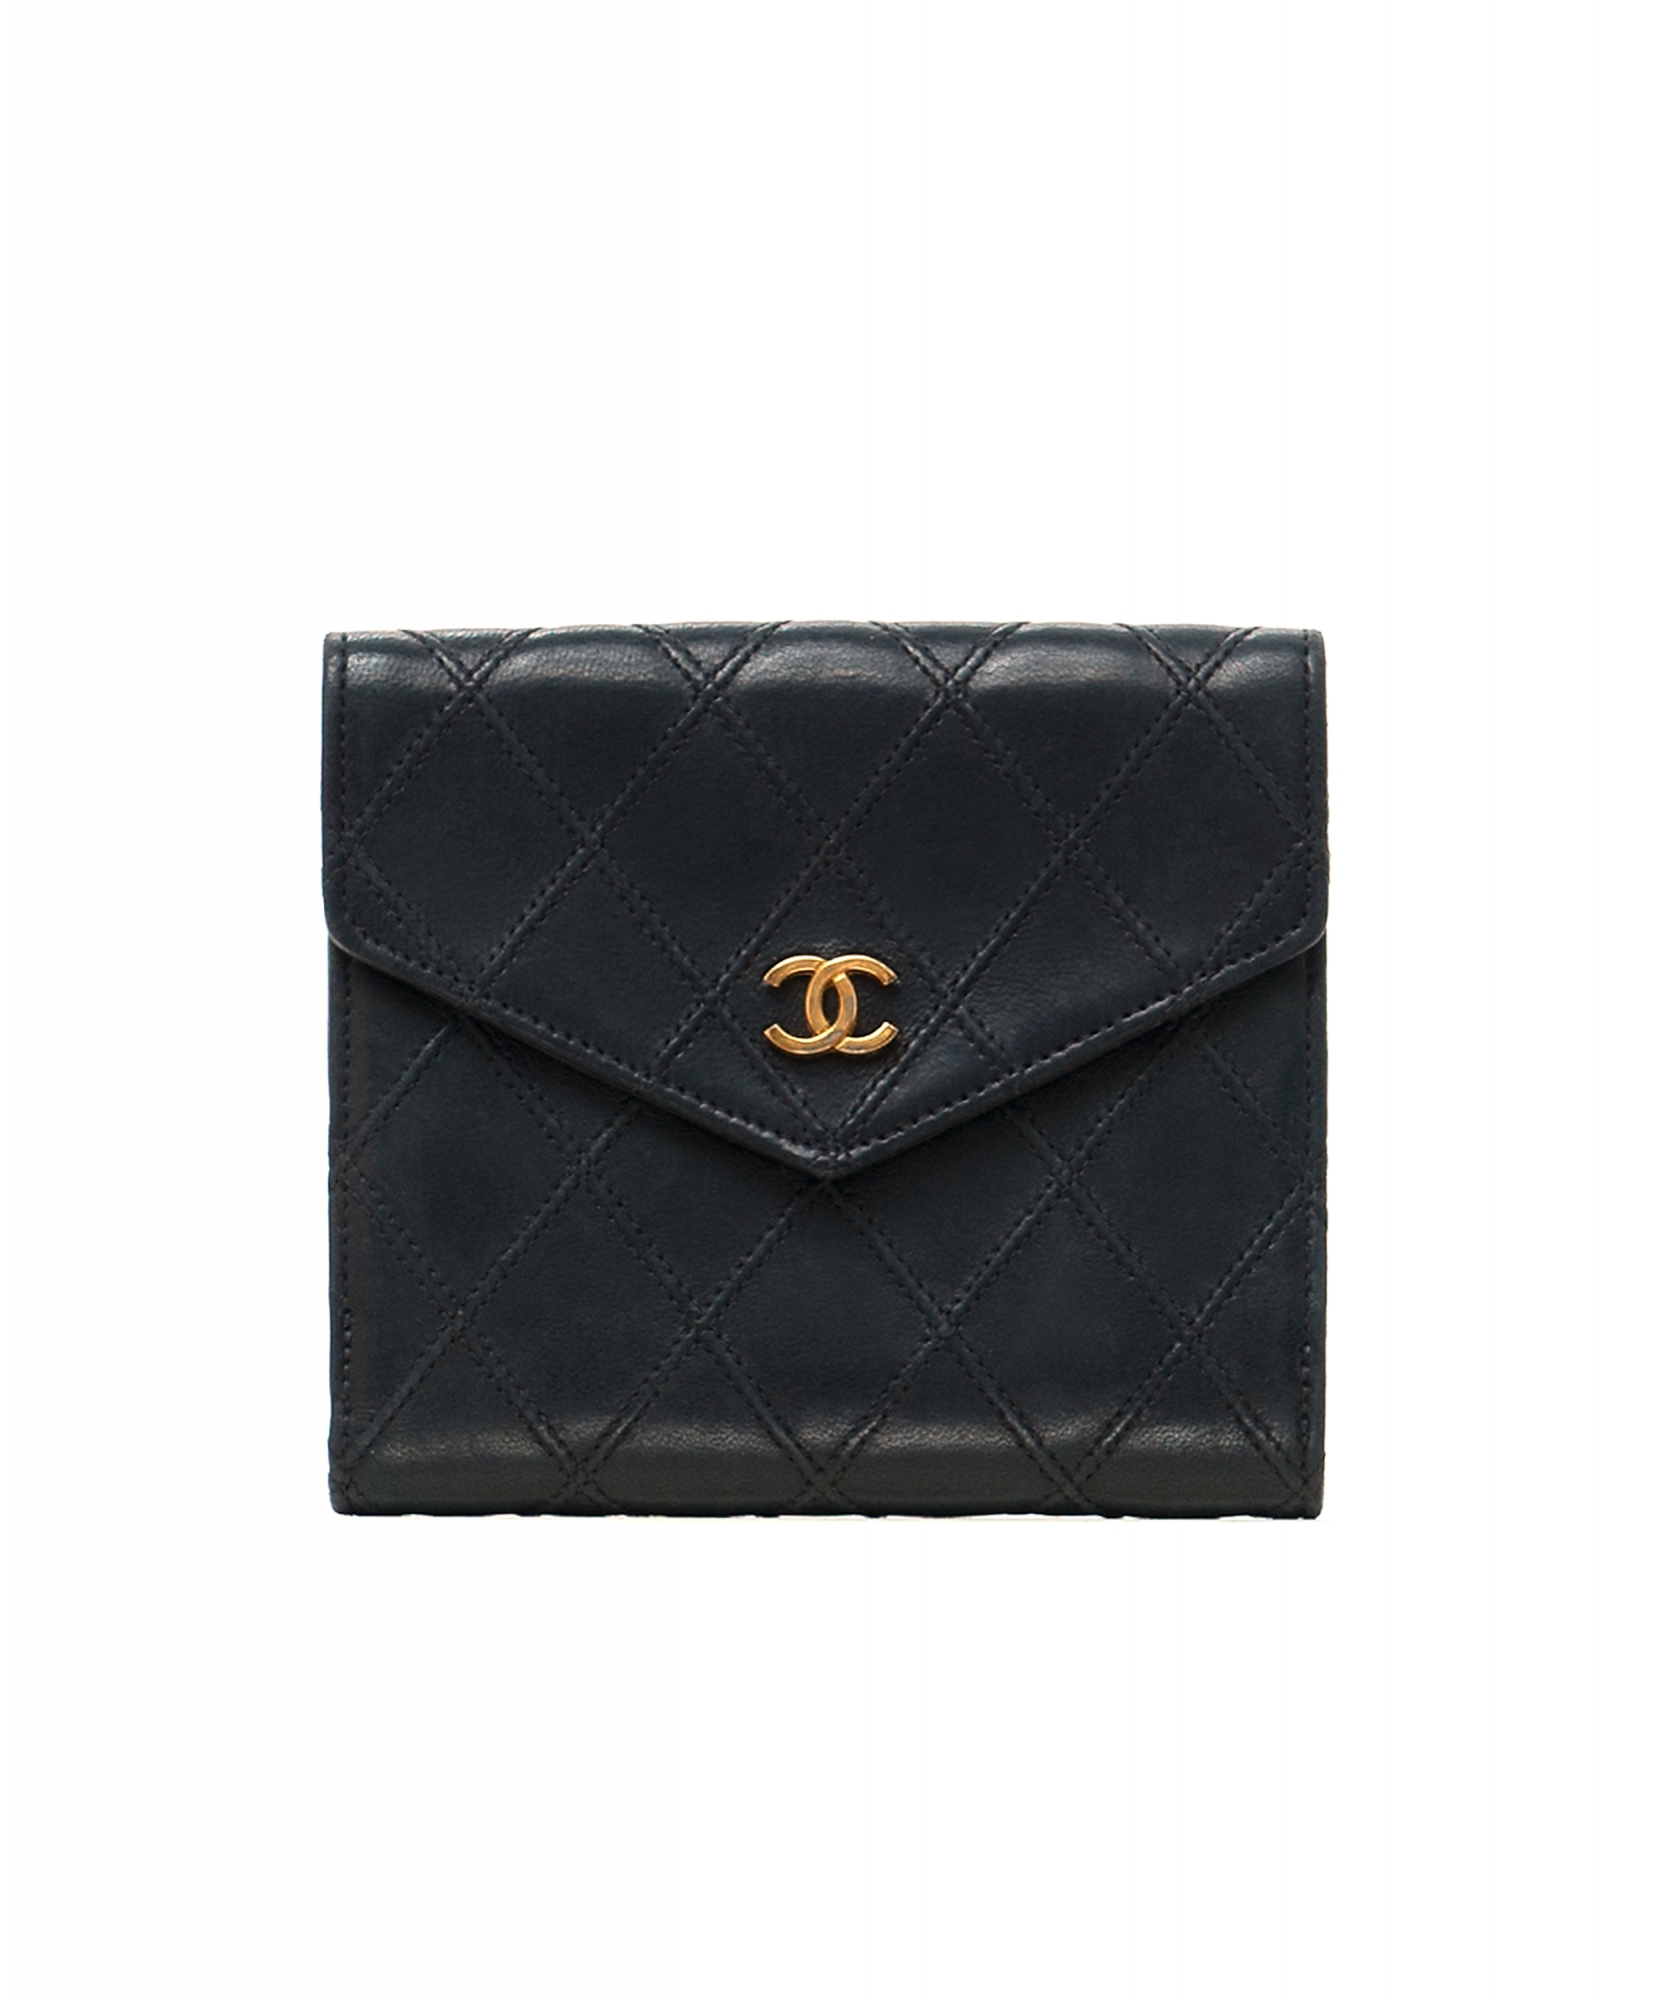 Chanel Black Leather Quilted Bifold Wallet - Chanel